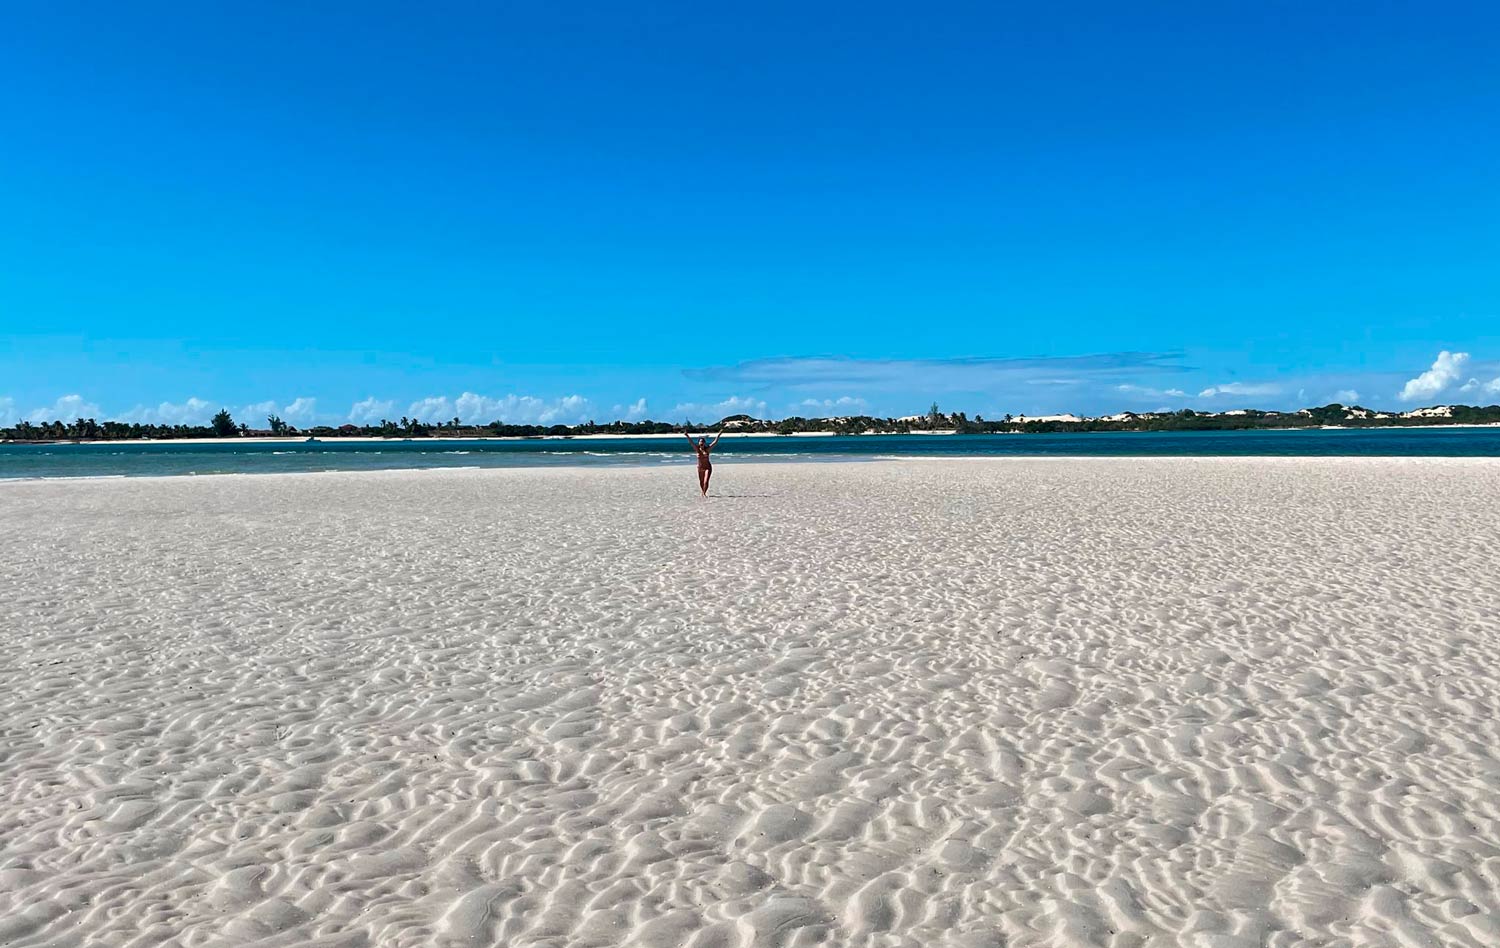 Sussurro The sandbars at low tide provide the most surreal settings and dreamiest landscapes